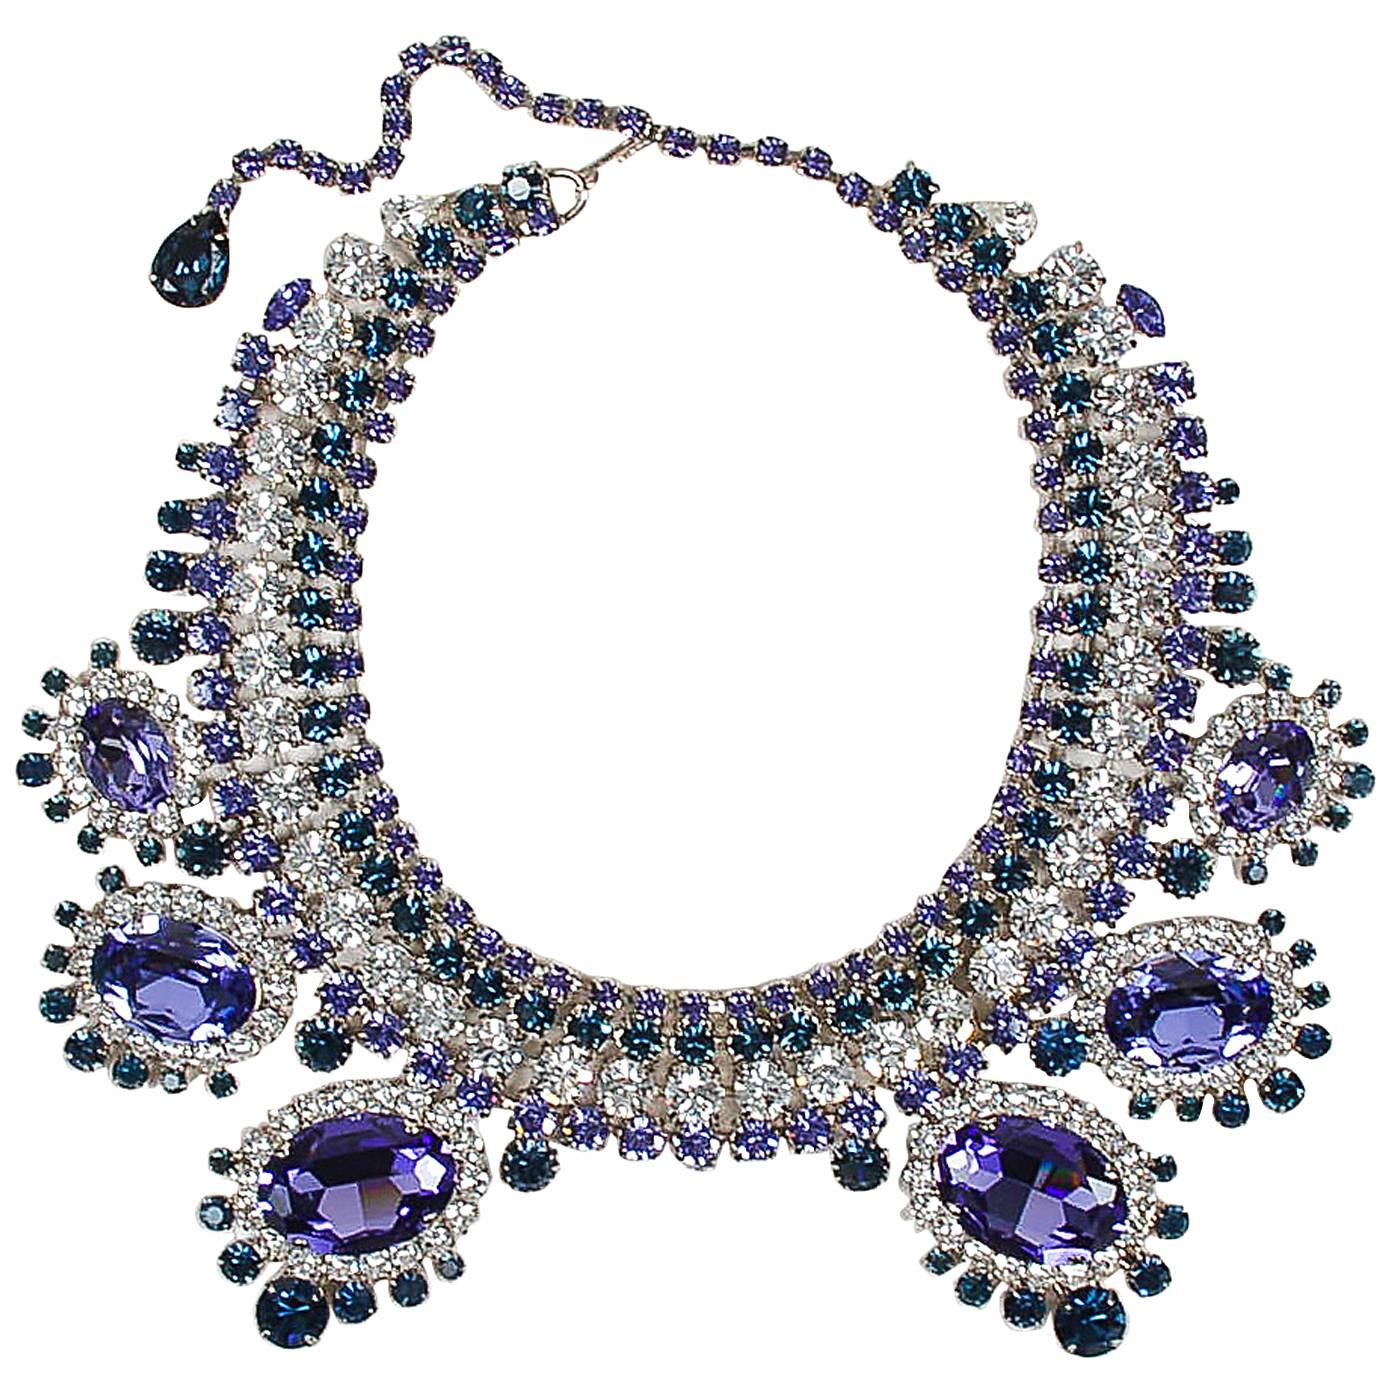 Oversized cocktail/statement bib necklace. Lustrous, light-catching rhinestone gem embellishment throughout. Purple, navy, and clear color scheme. Hook closure with extender chain. Back of necklace is engraved, 